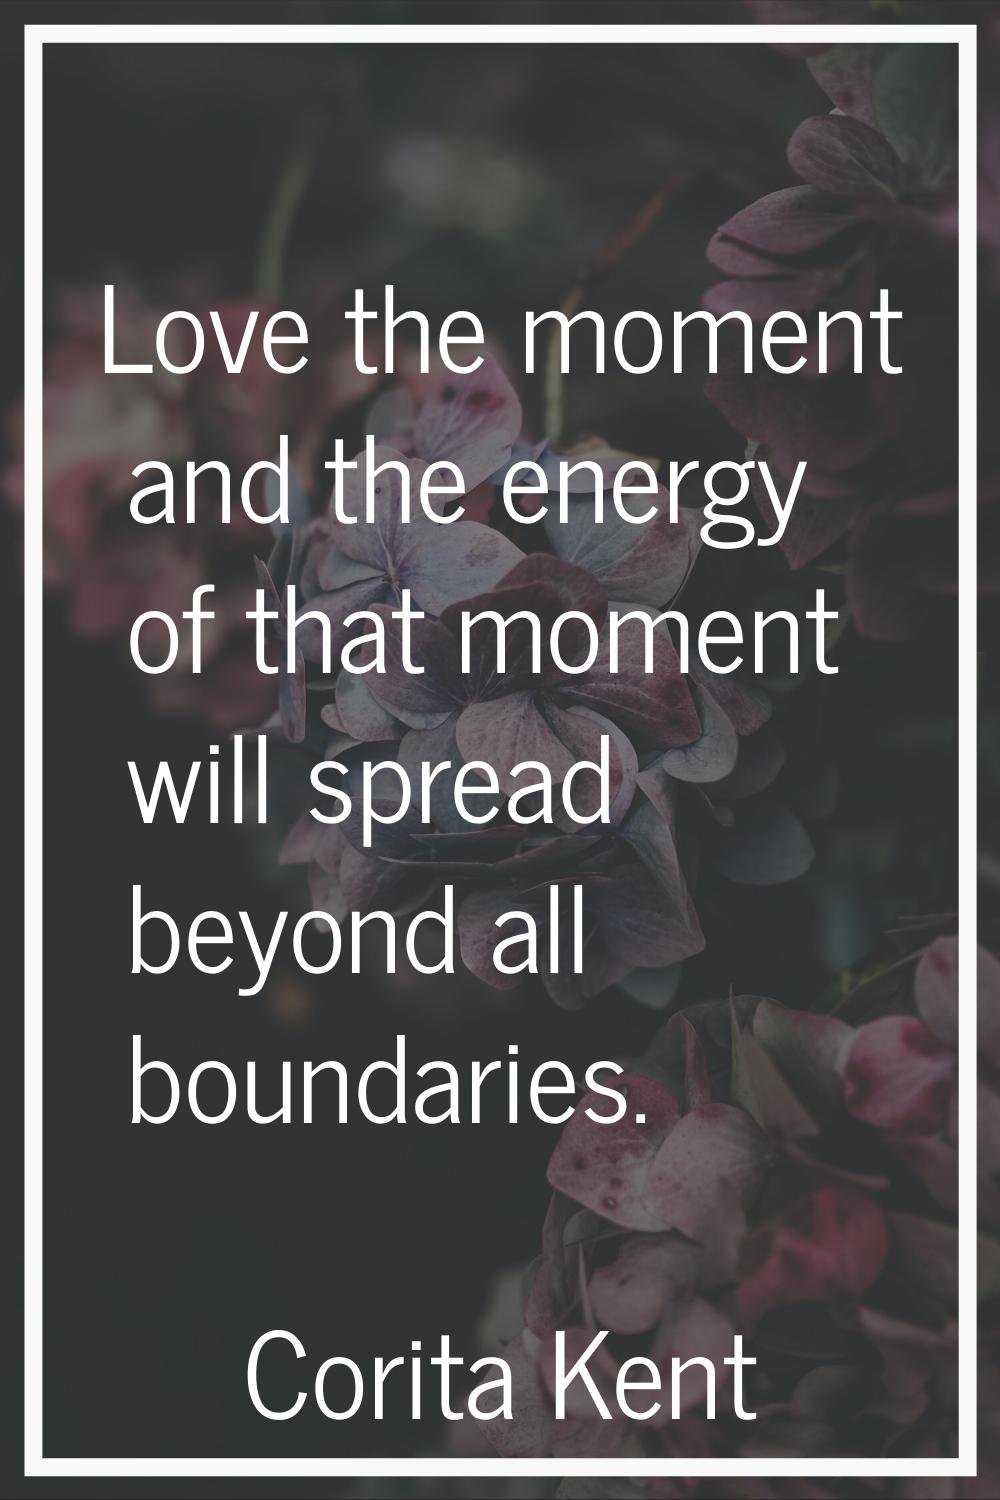 Love the moment and the energy of that moment will spread beyond all boundaries.